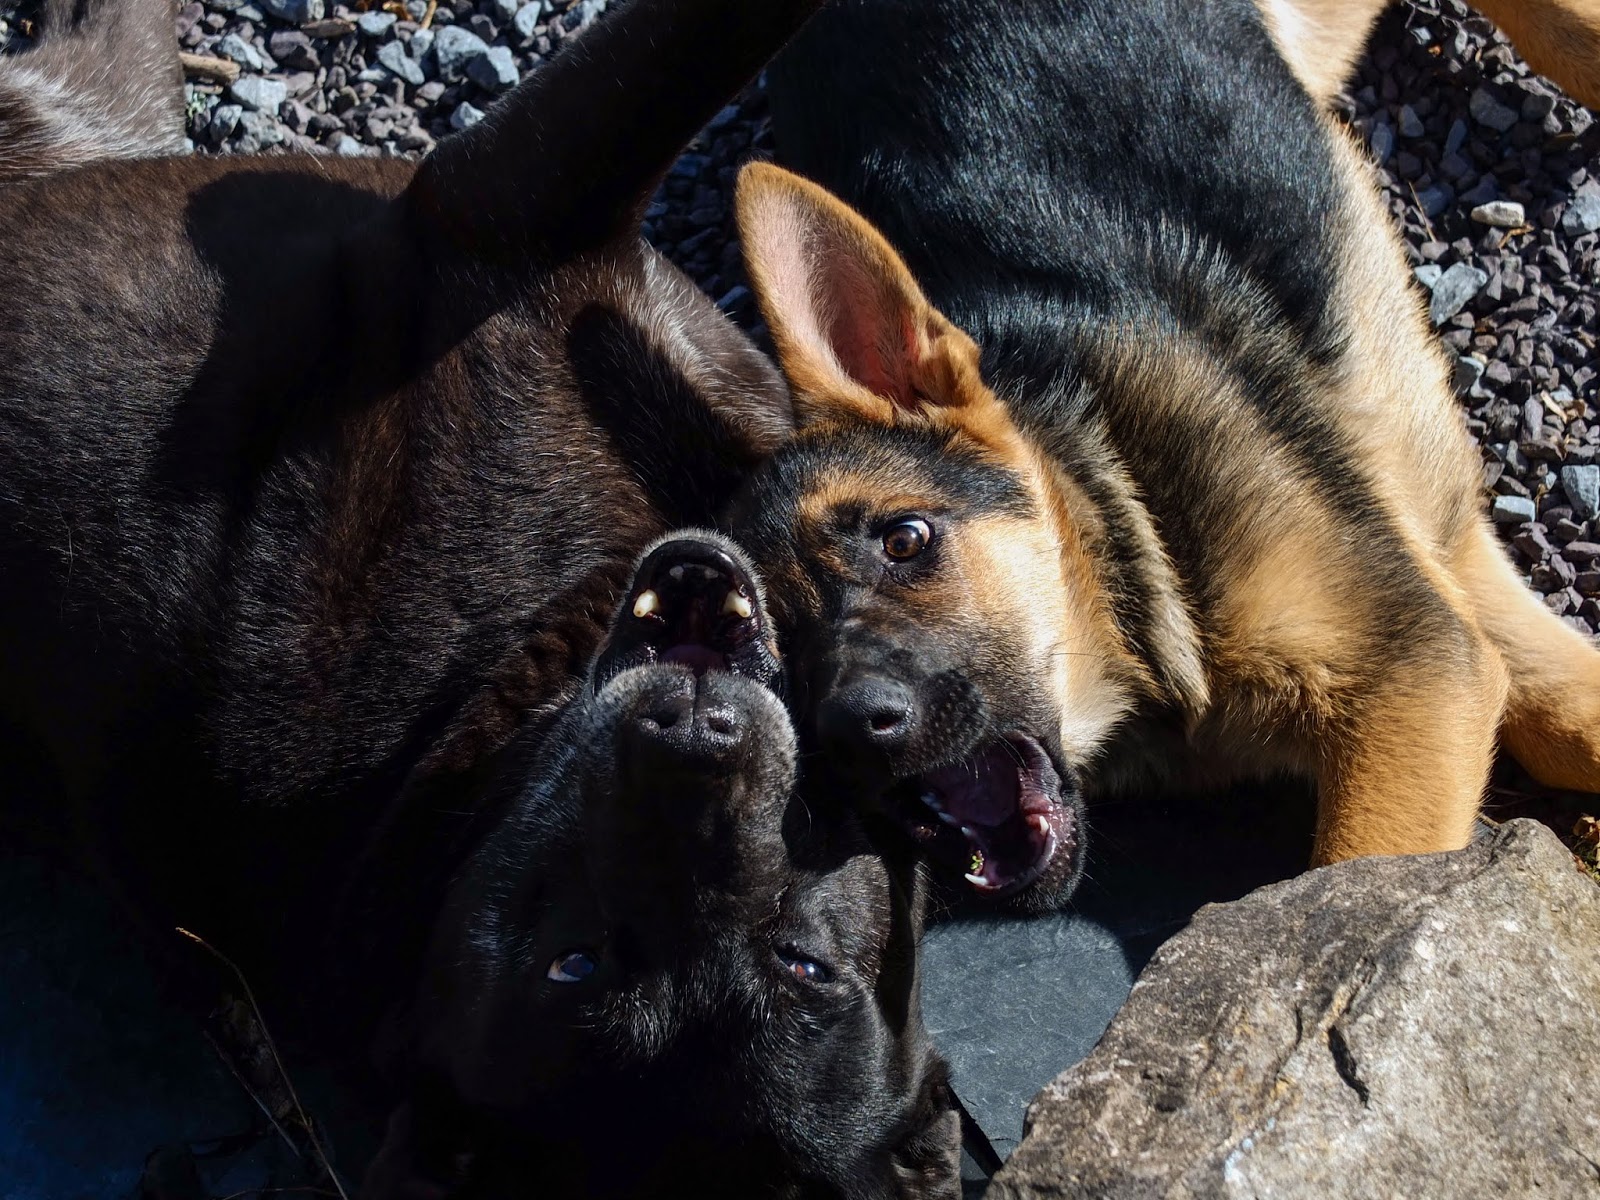 Judy a black Labrador and Nala a German Shepherd puppy playing together in the sun.